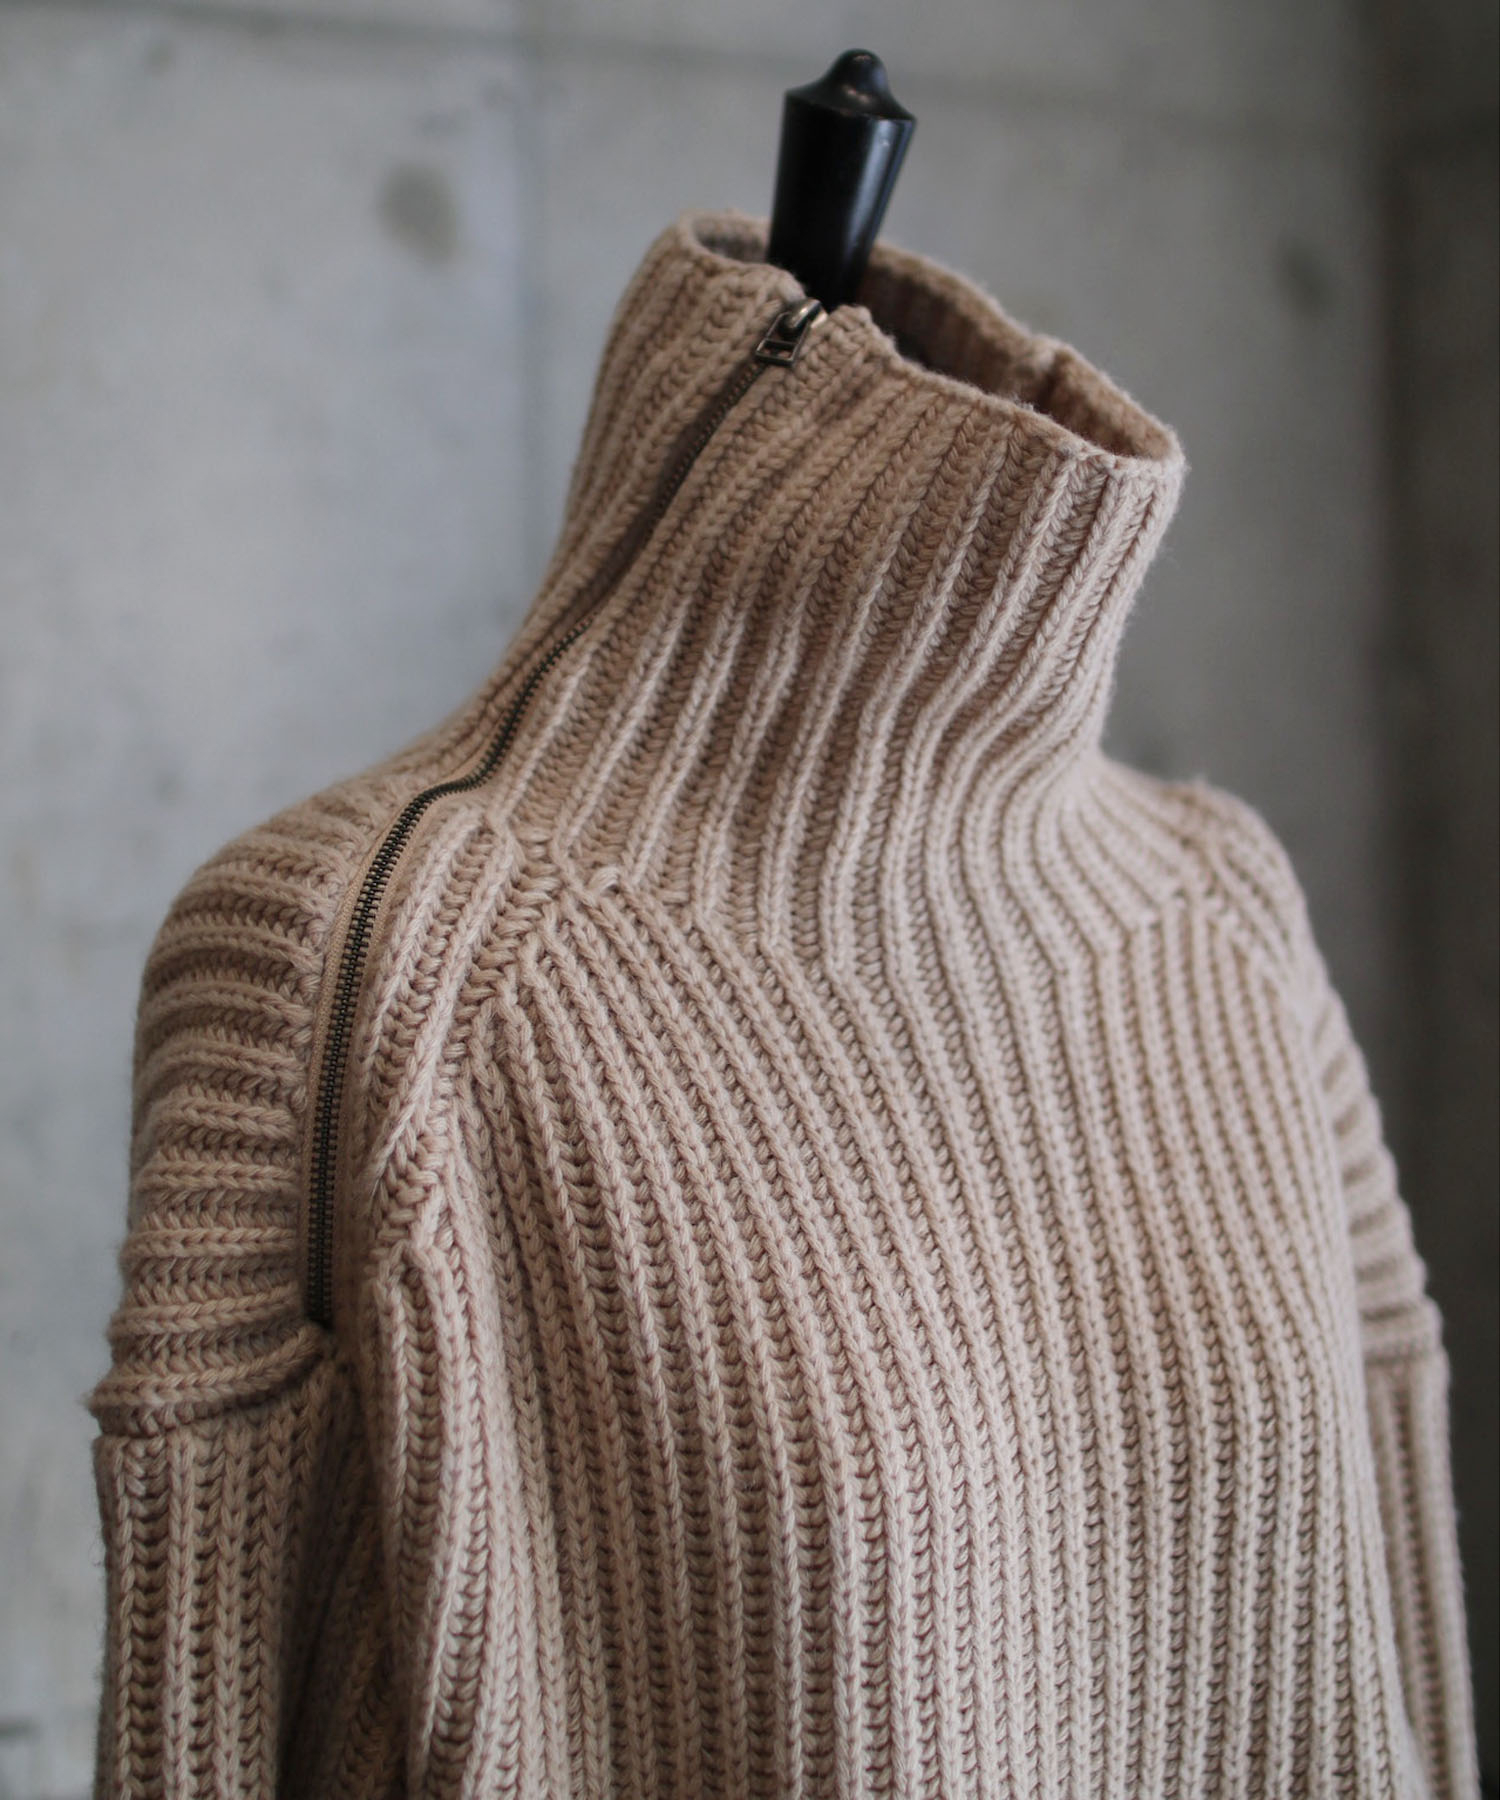 MILITARY KNIT